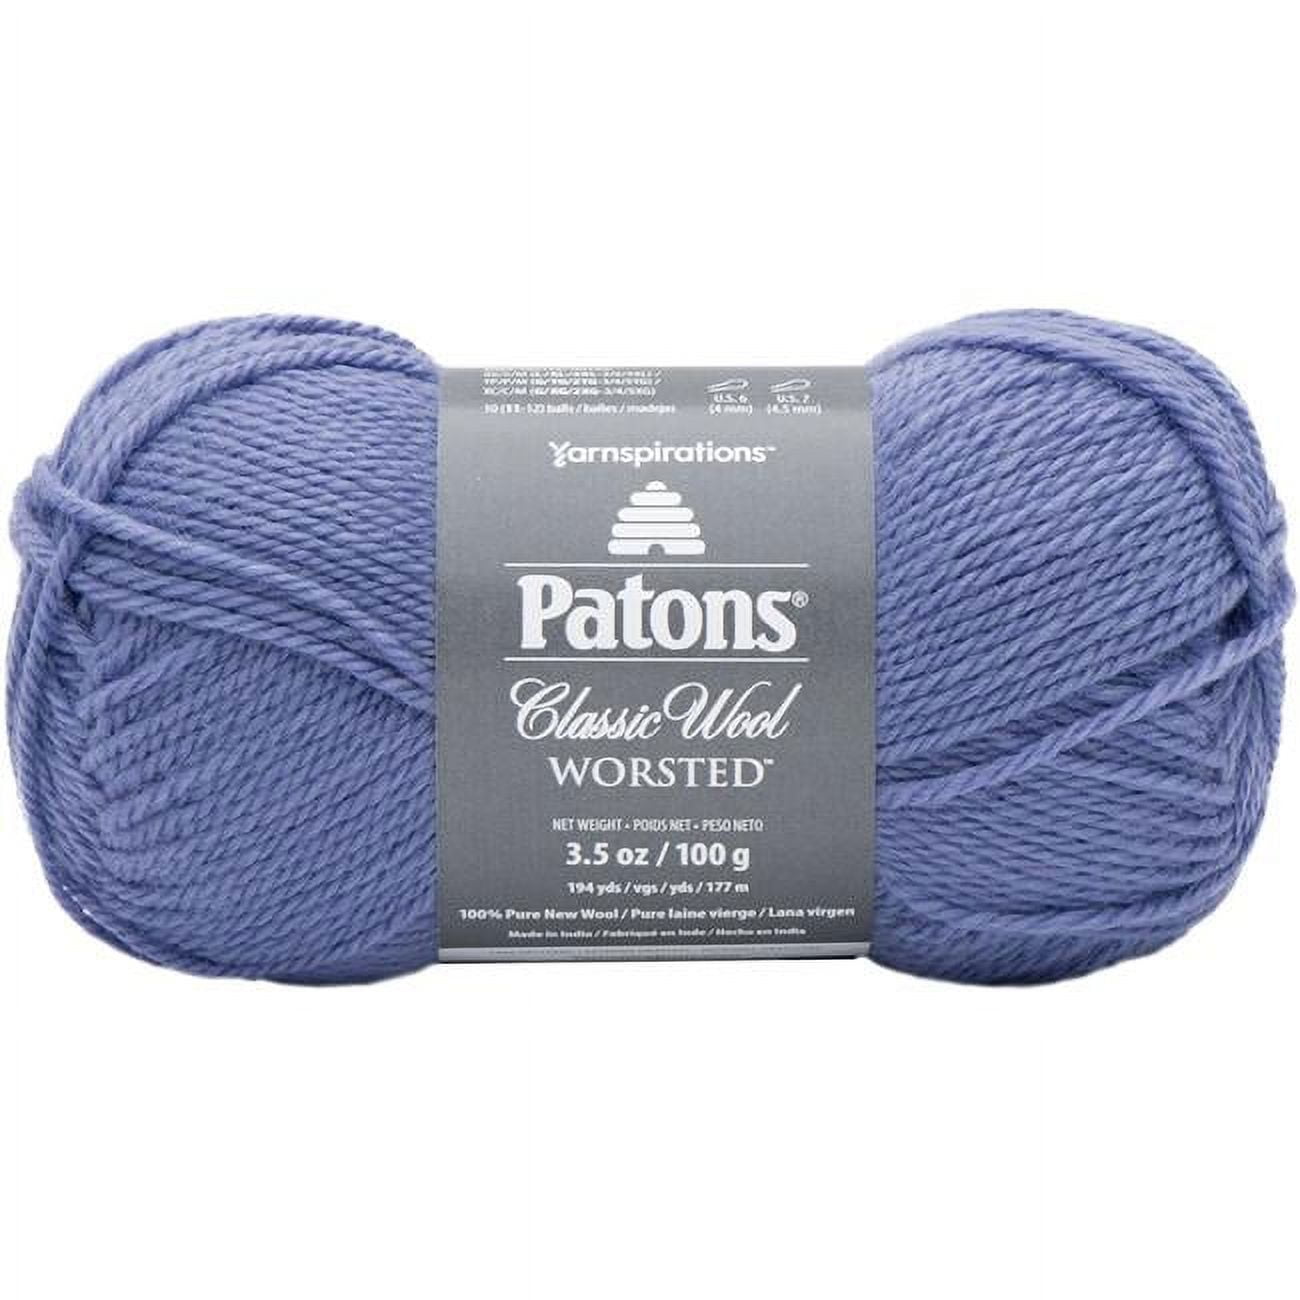 Spinrite 244077-77771 Patons Classic Wool Yarn, Country Blue